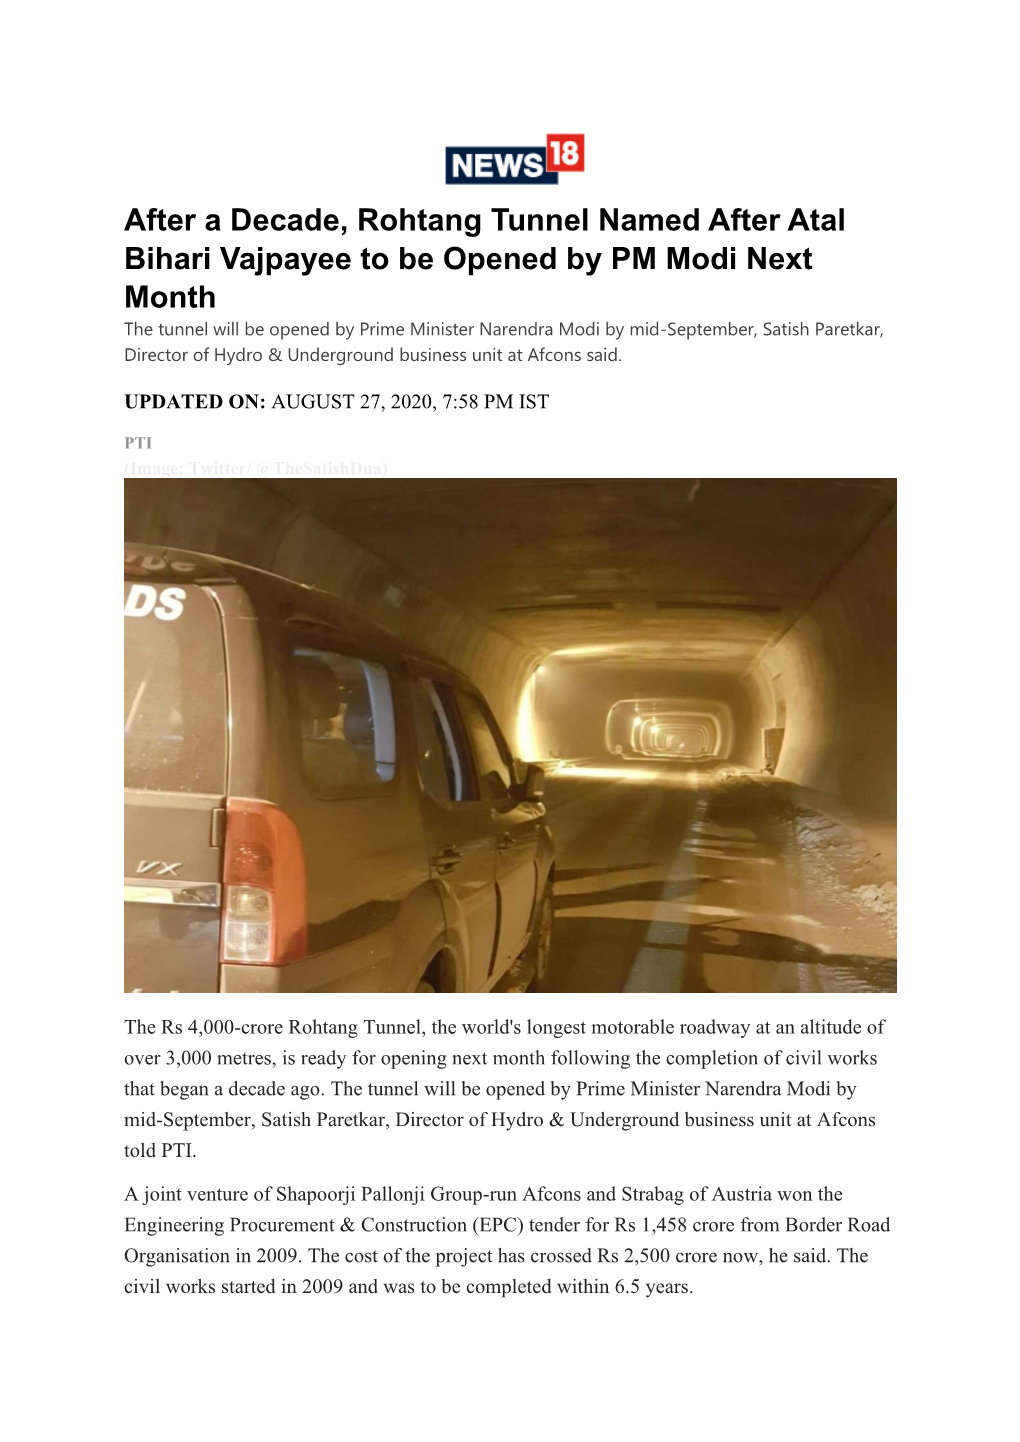 After a Decade, Rohtang Tunnel Named After Atal Bihari Vajpayee to Be Opened by PM Modi Next Month